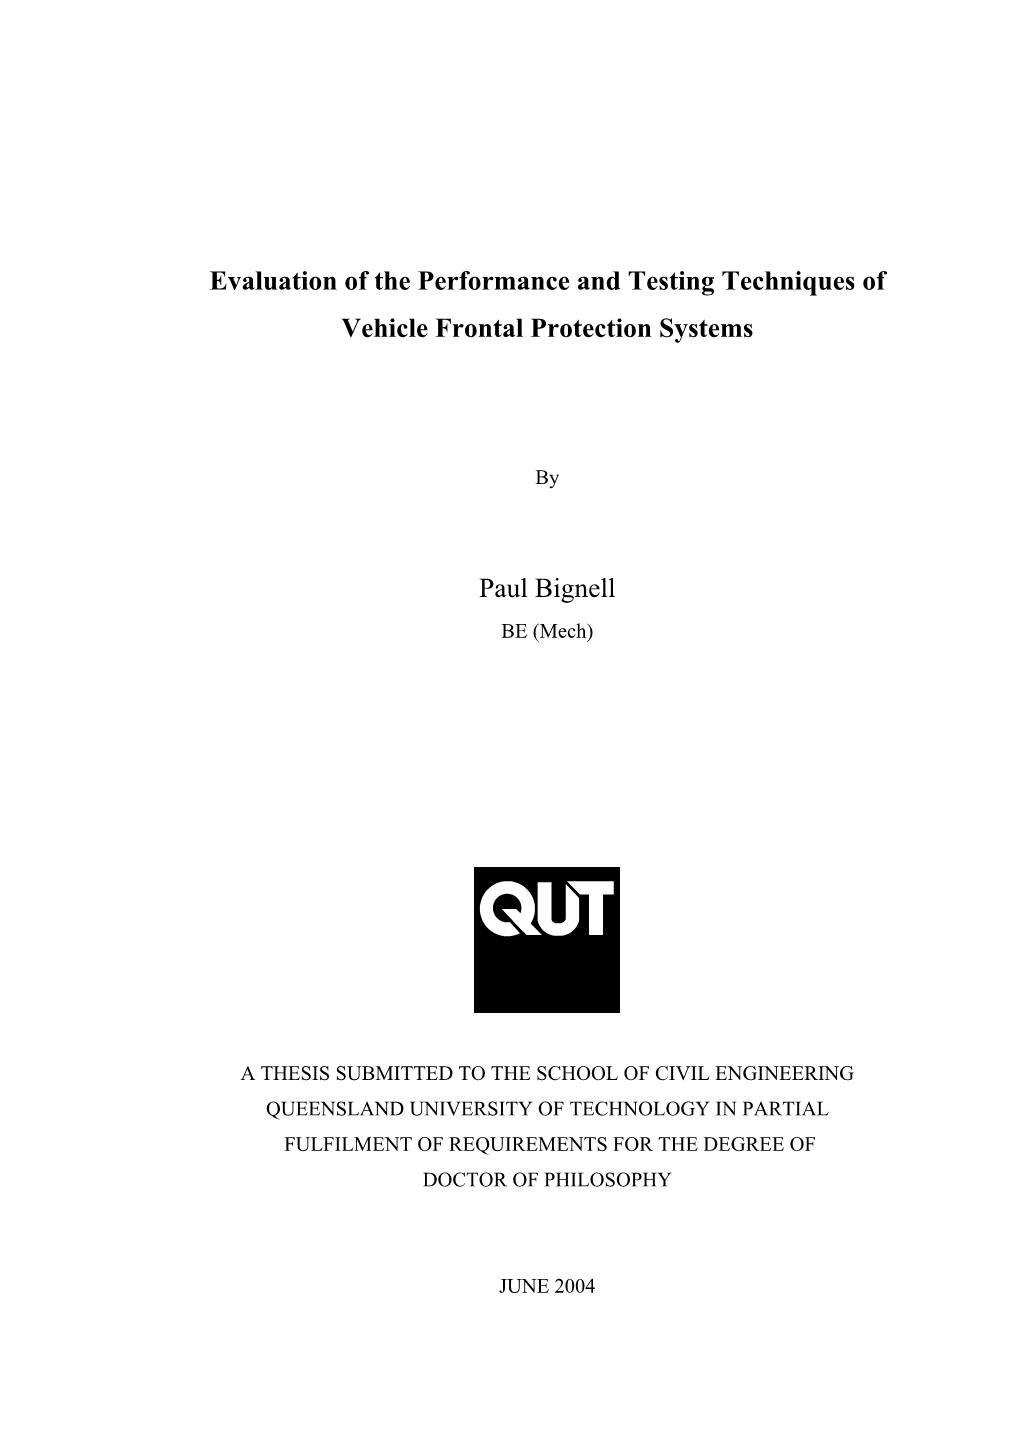 Evaluation of the Performance and Testing Techniques of Vehicle Frontal Protection Systems Paul Bignell